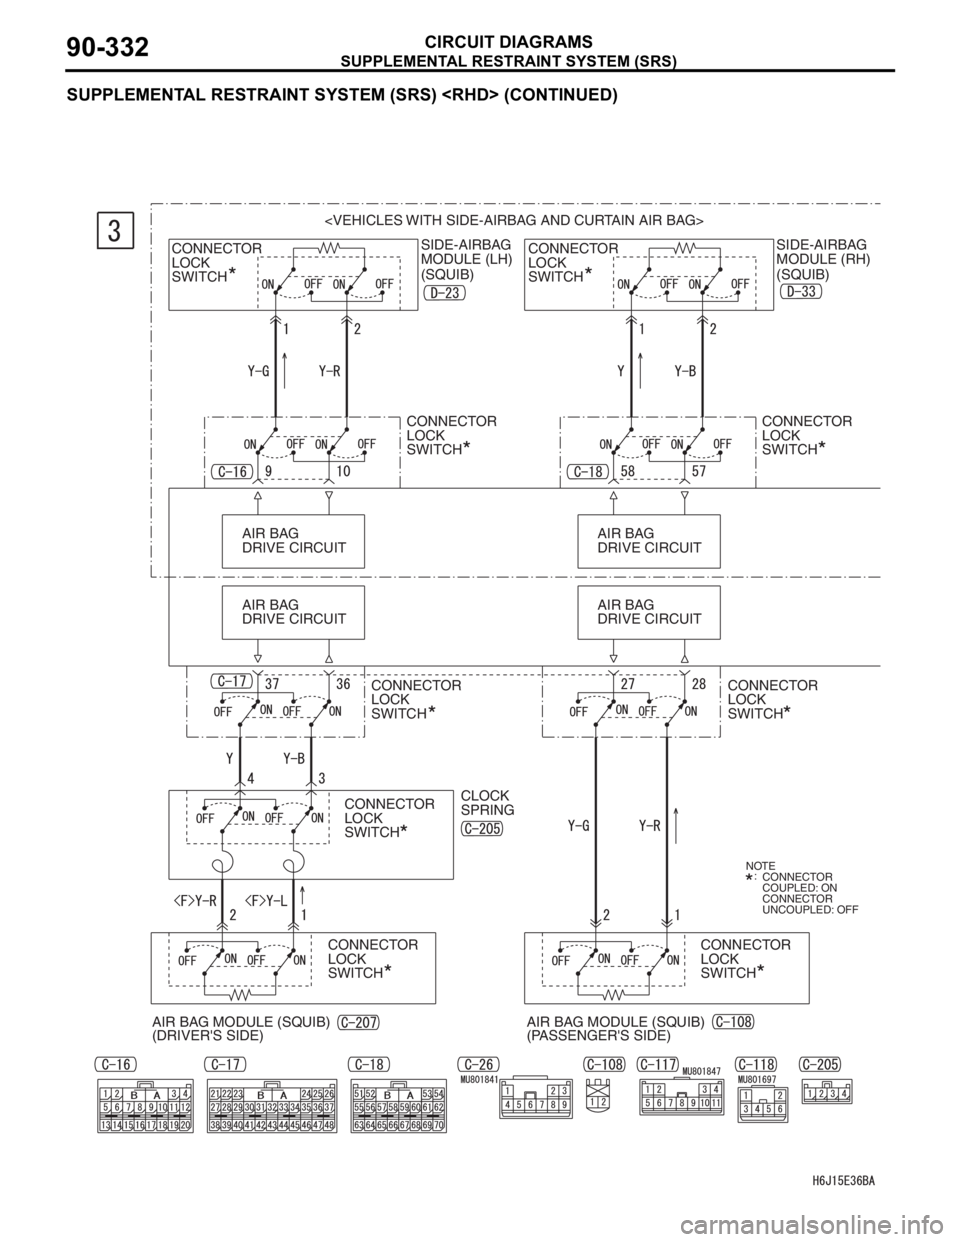 MITSUBISHI LANCER 2006  Workshop Manual SUPPLEMENTAL RESTRAINT SYSTEM (SRS)
CIRCUIT DIAGRAMS90-332
SUPPLEMENTAL RESTRAINT SYSTEM (SRS) <RHD> (CONTINUED)
<VEHICLES WITH SIDE-AIRBAG AND CURTAIN AIR BAG>
SIDE-AIRBAG 
MODULE (RH)
(SQUIB) CONNEC